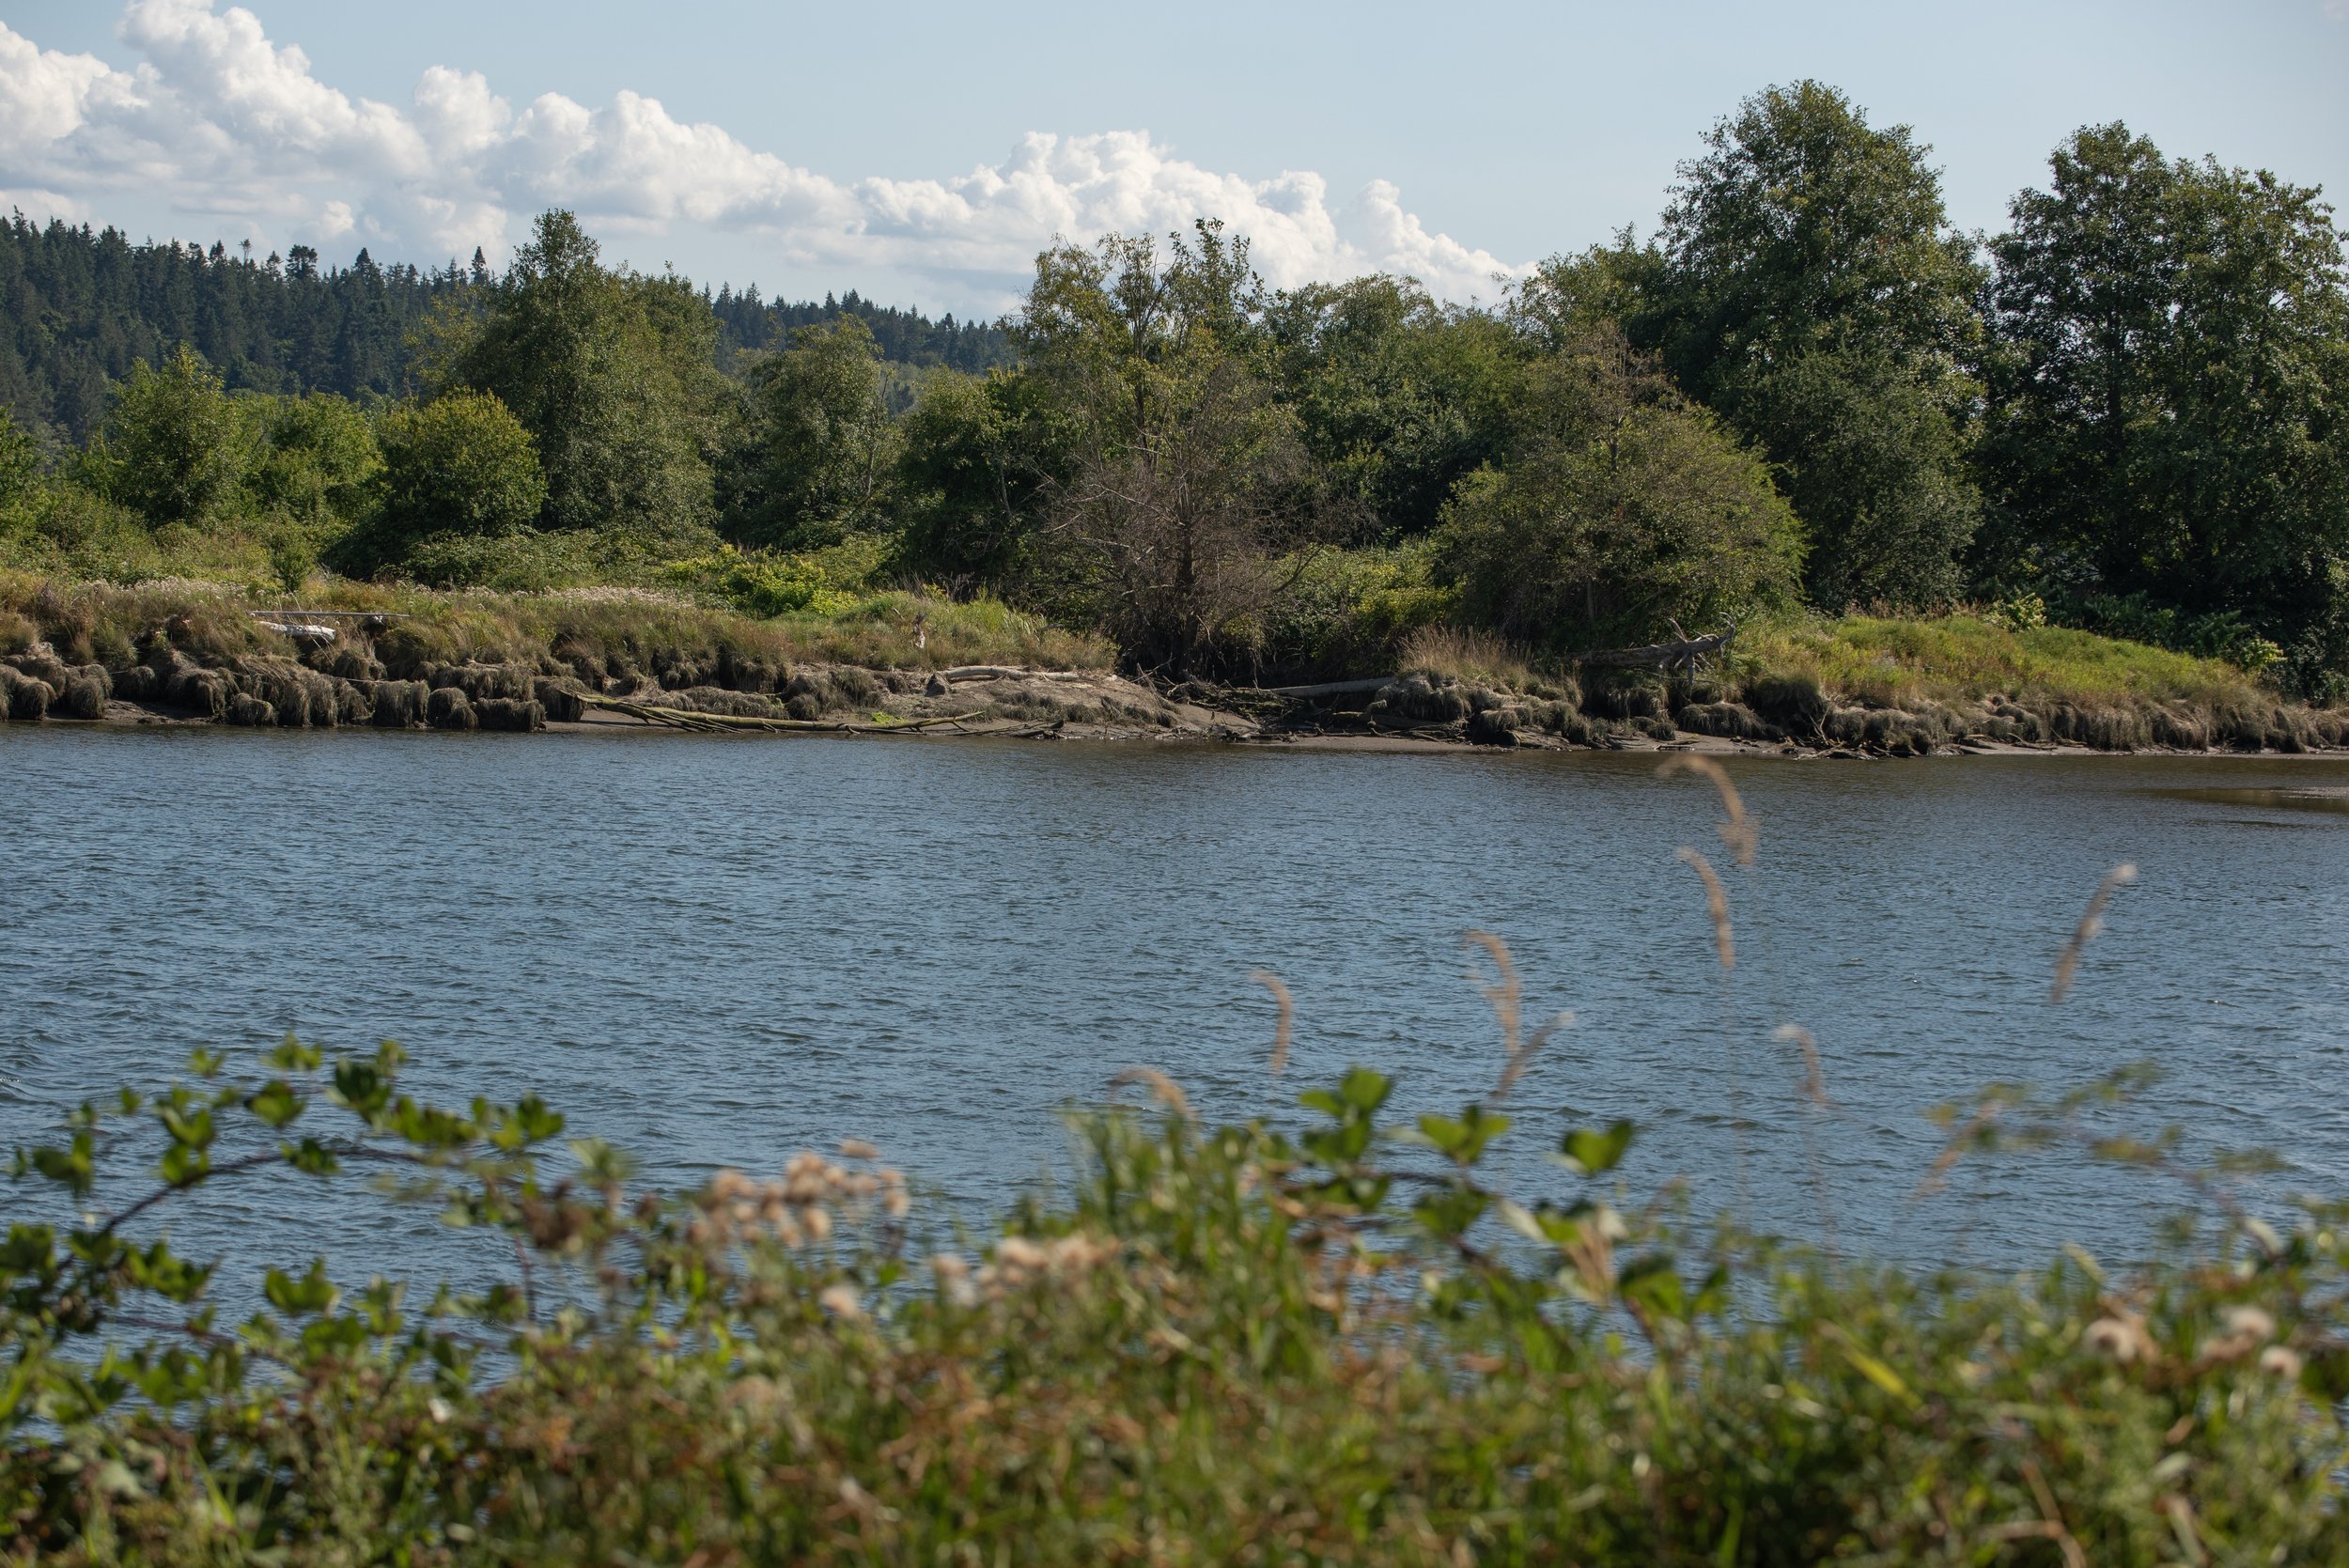  The Stillaguamish River runs alongside TNC’s Port Susan Bay and the Stillagumish Tribe’s zis a ba II site, and will provide an influx of fresh water to the estuary as a result of restoration. © Hannah Letinich/TNC 